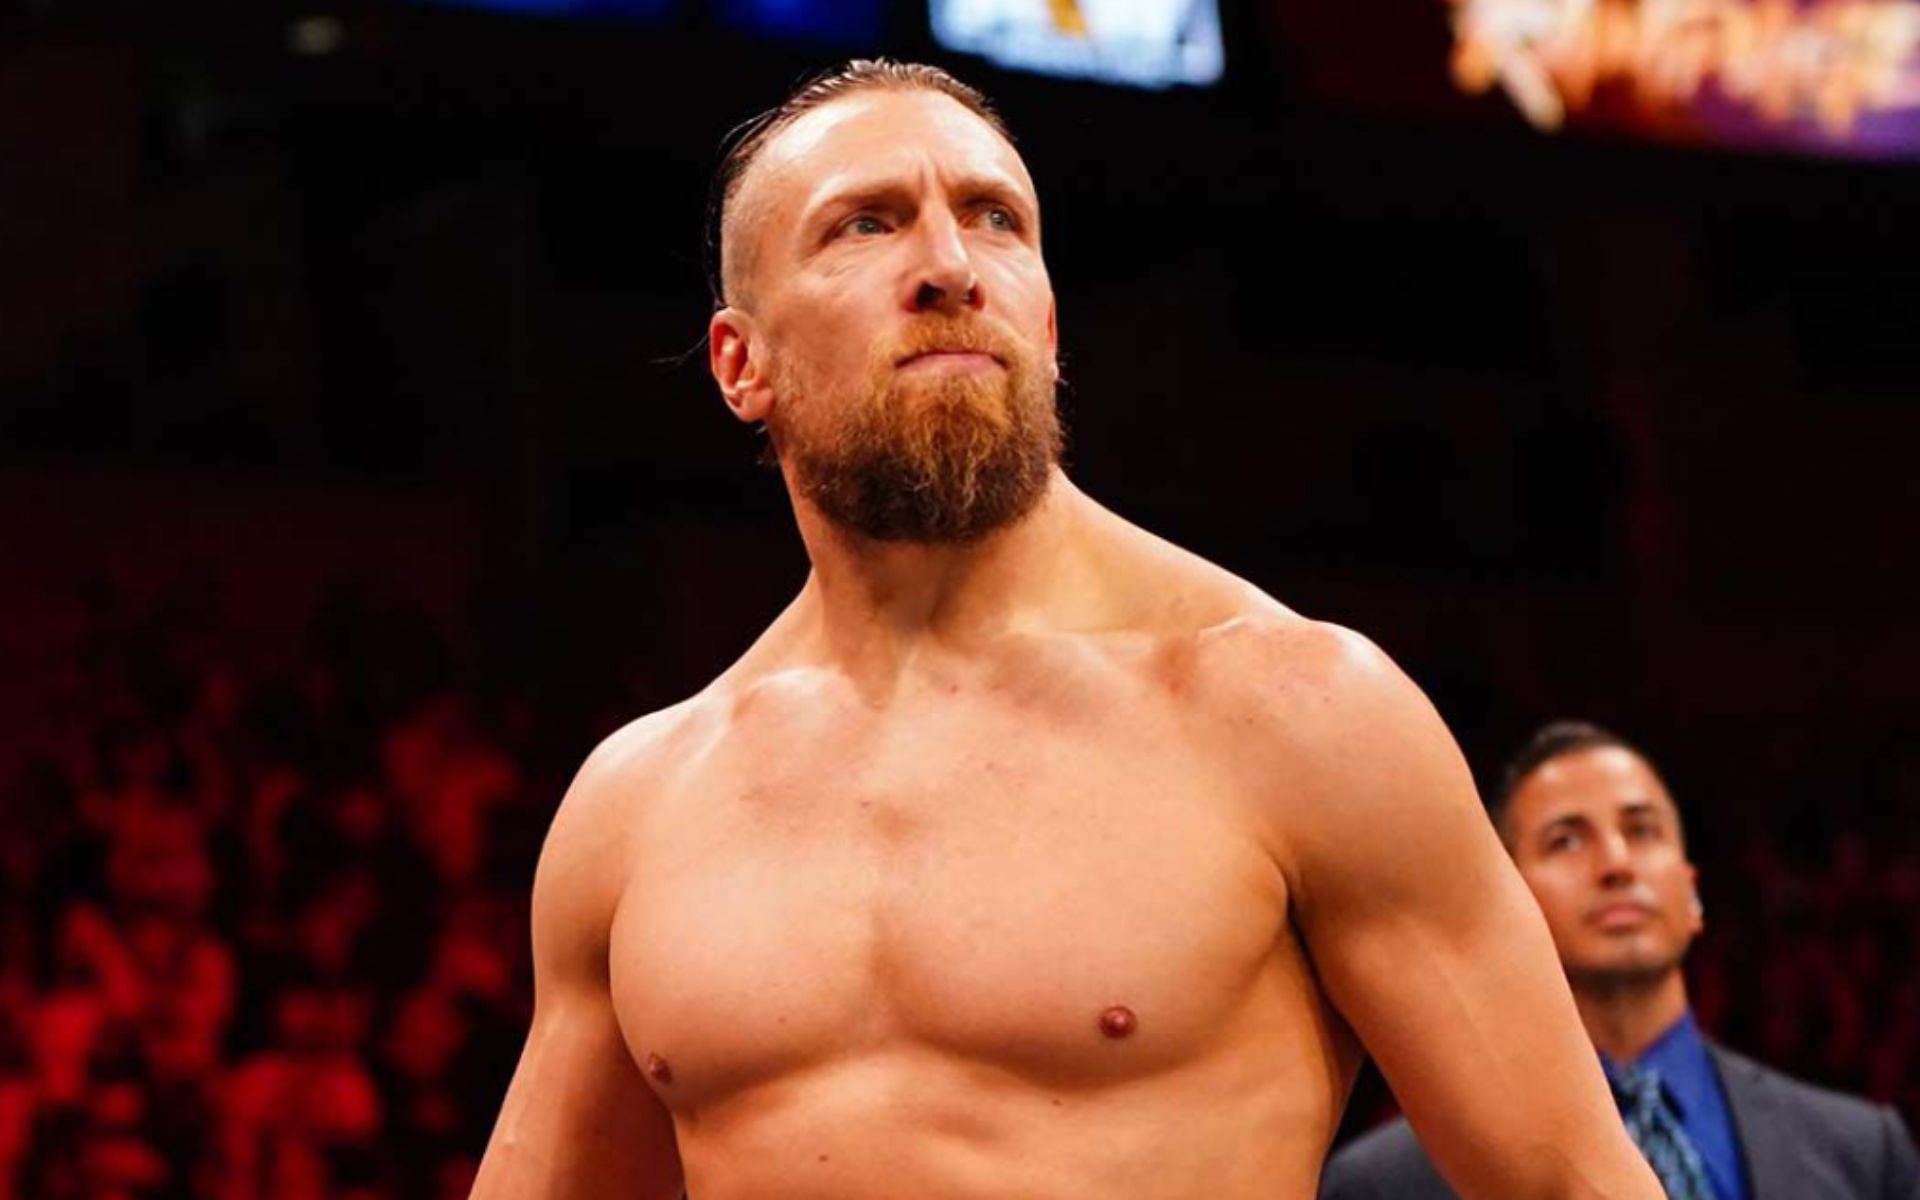 Bryan Danielson has not won a title on AEW since his debut in 2021